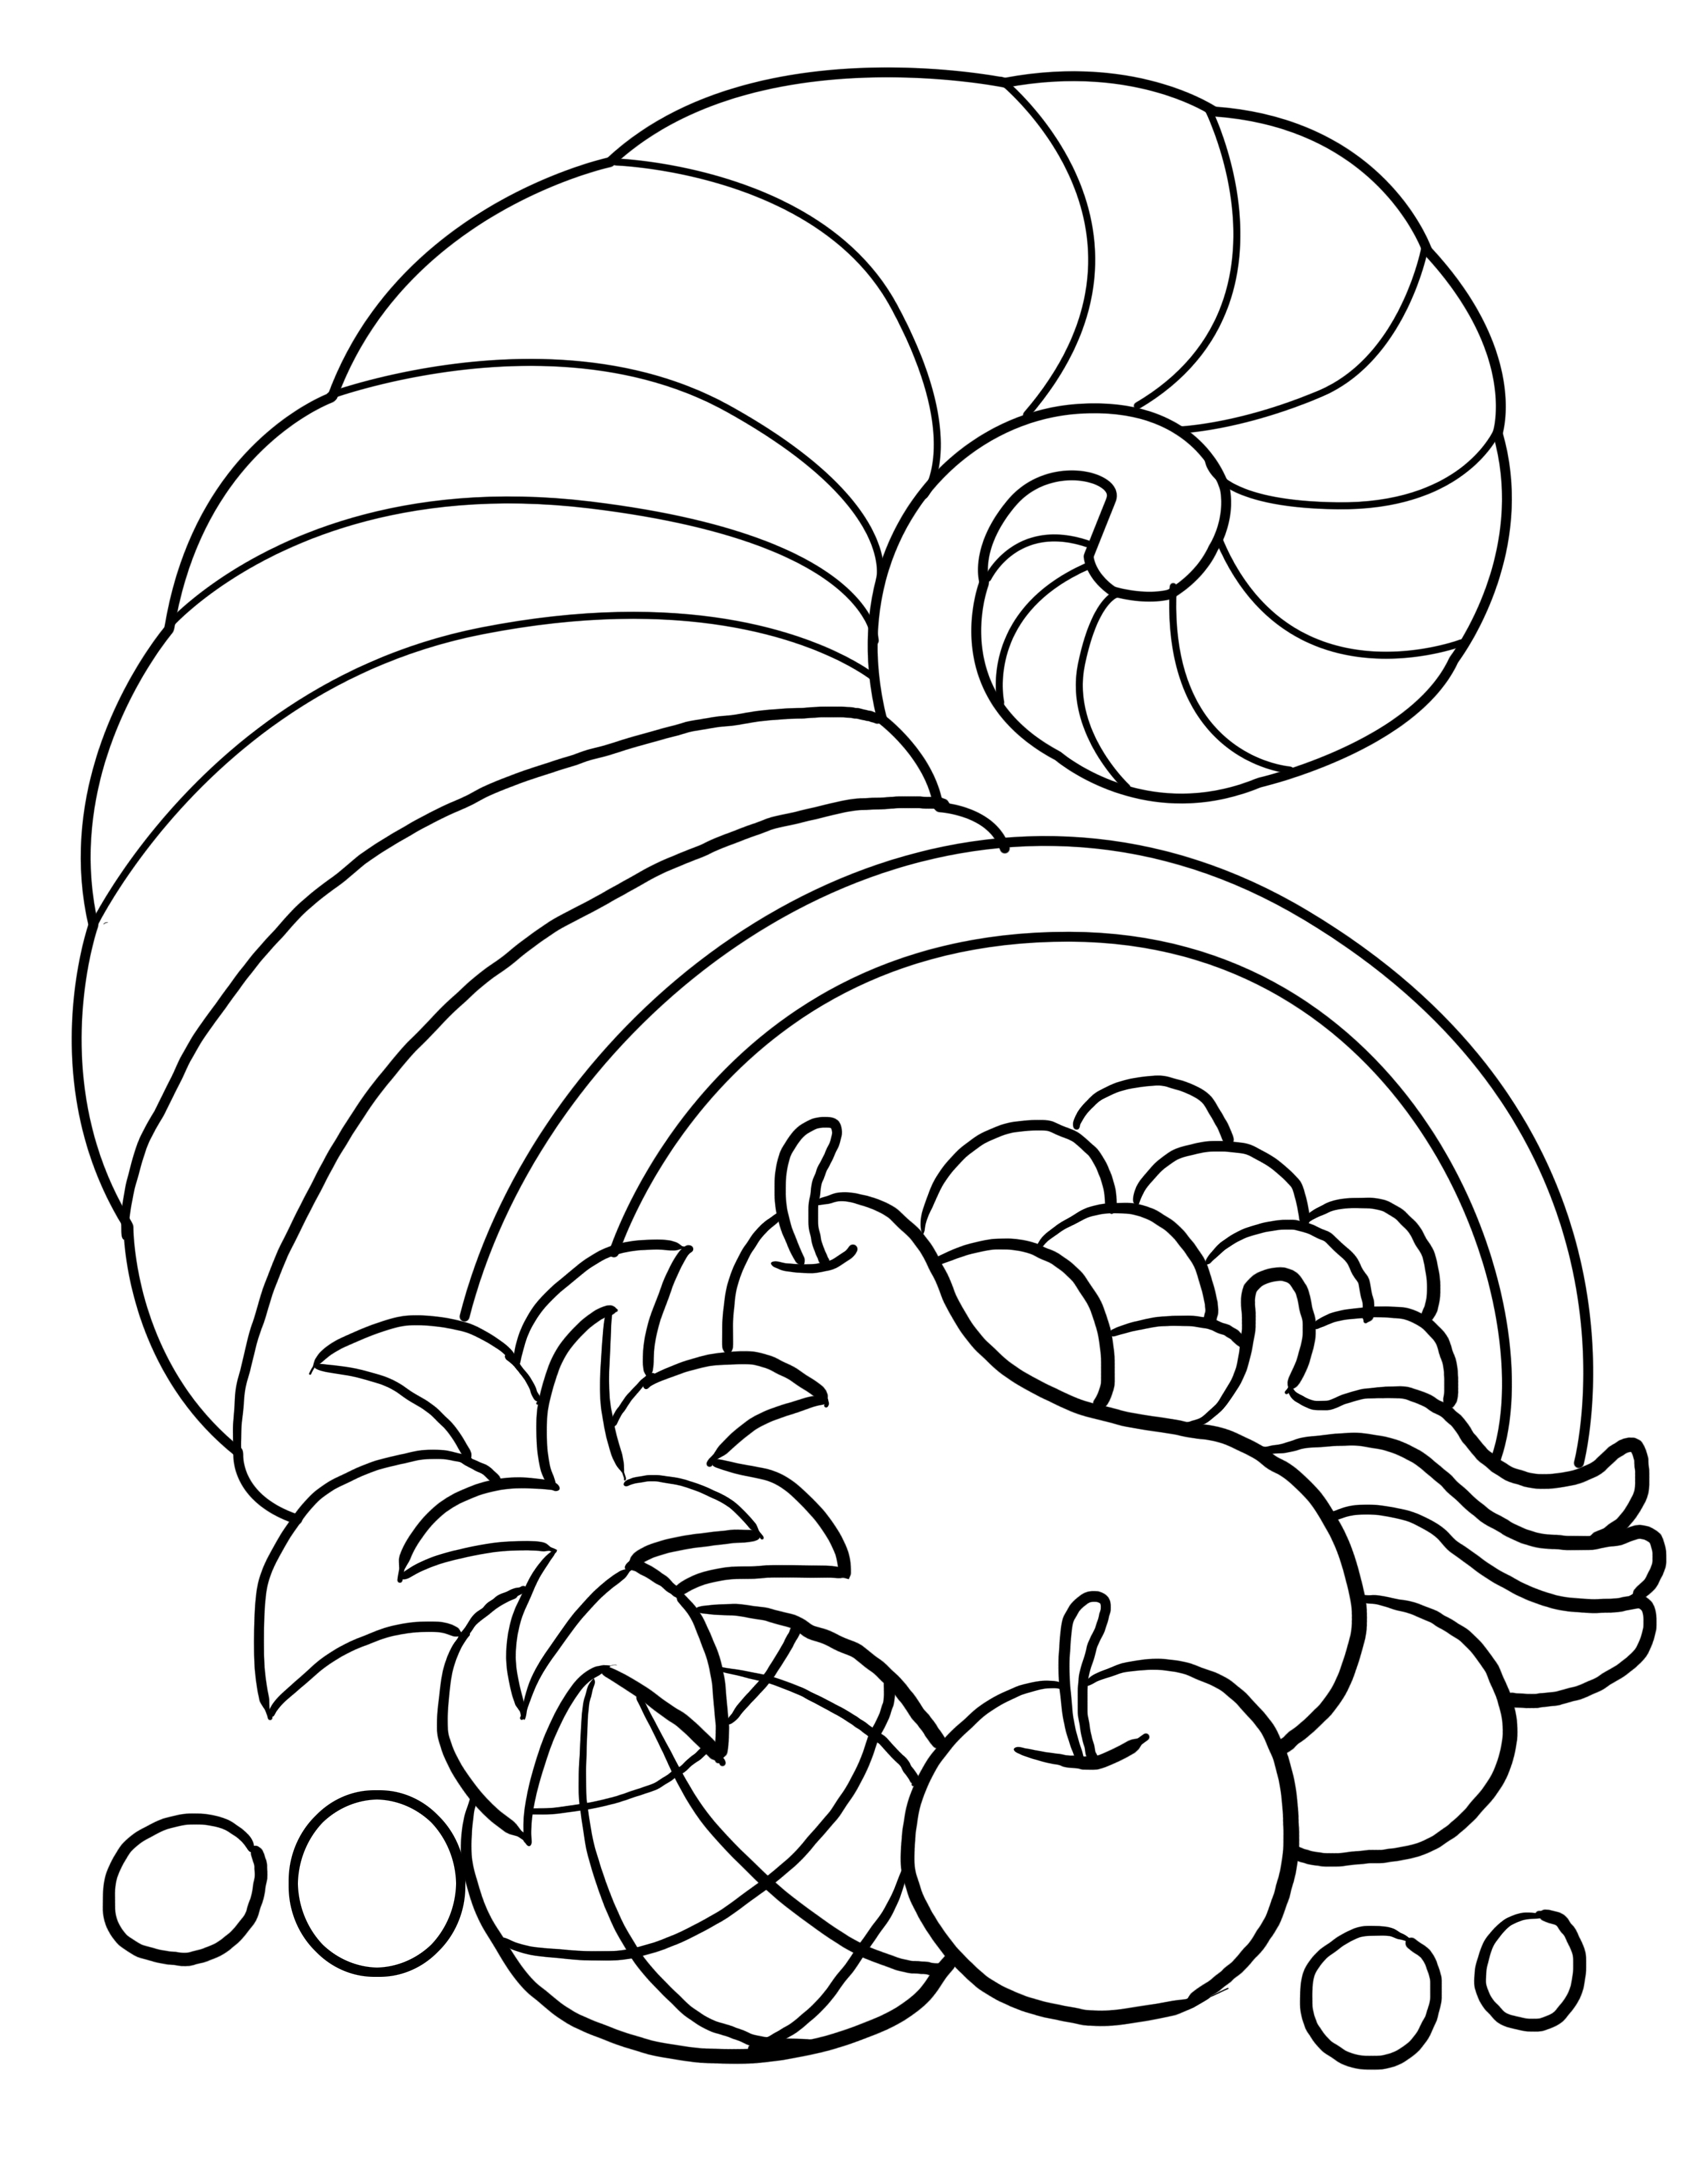 free-printable-thanksgiving-coloring-pages-for-kids-it-s-pam-del